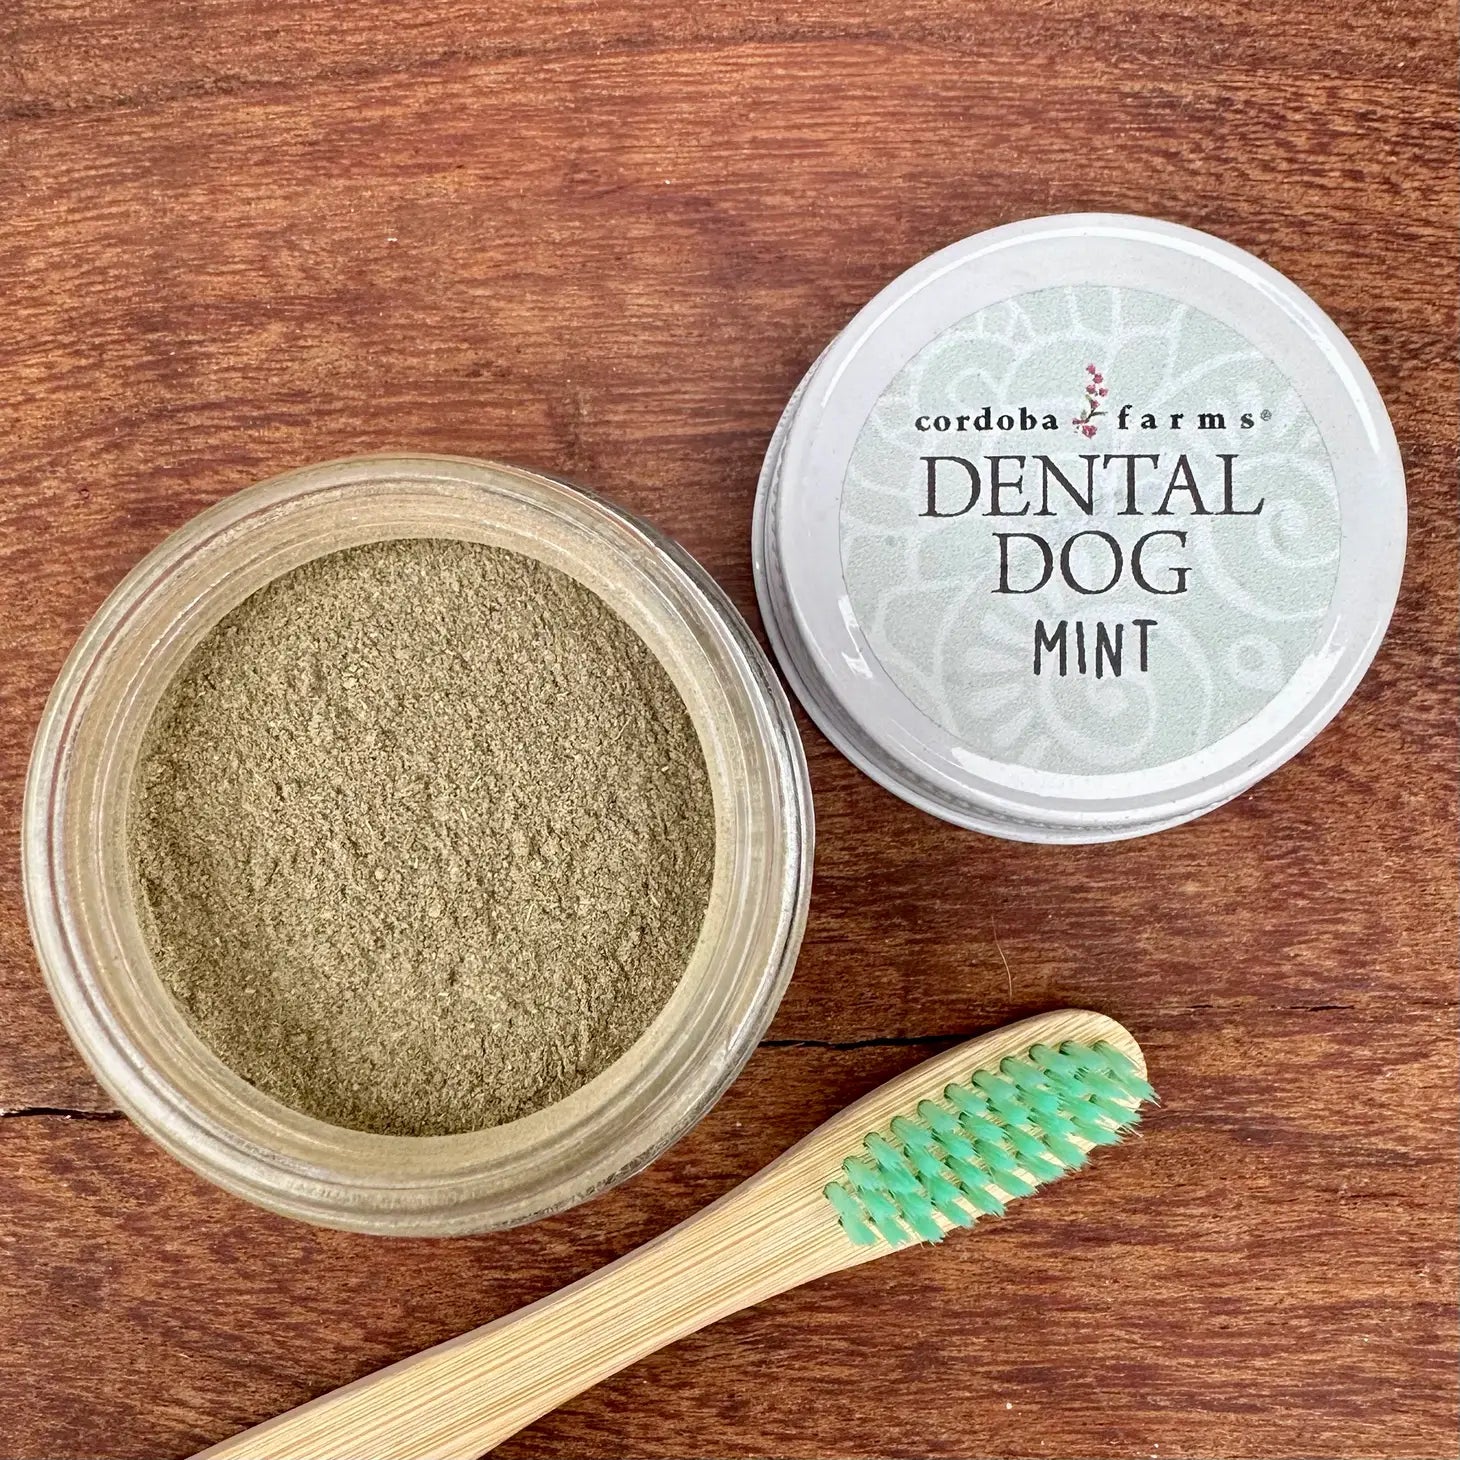 Cordoba Farms Dental Dog mint tooth powder lid and jar. The jar is open and showing its contents which is a light green powder. There is also a bamboo toothbrush with green bristles resting near the jar.